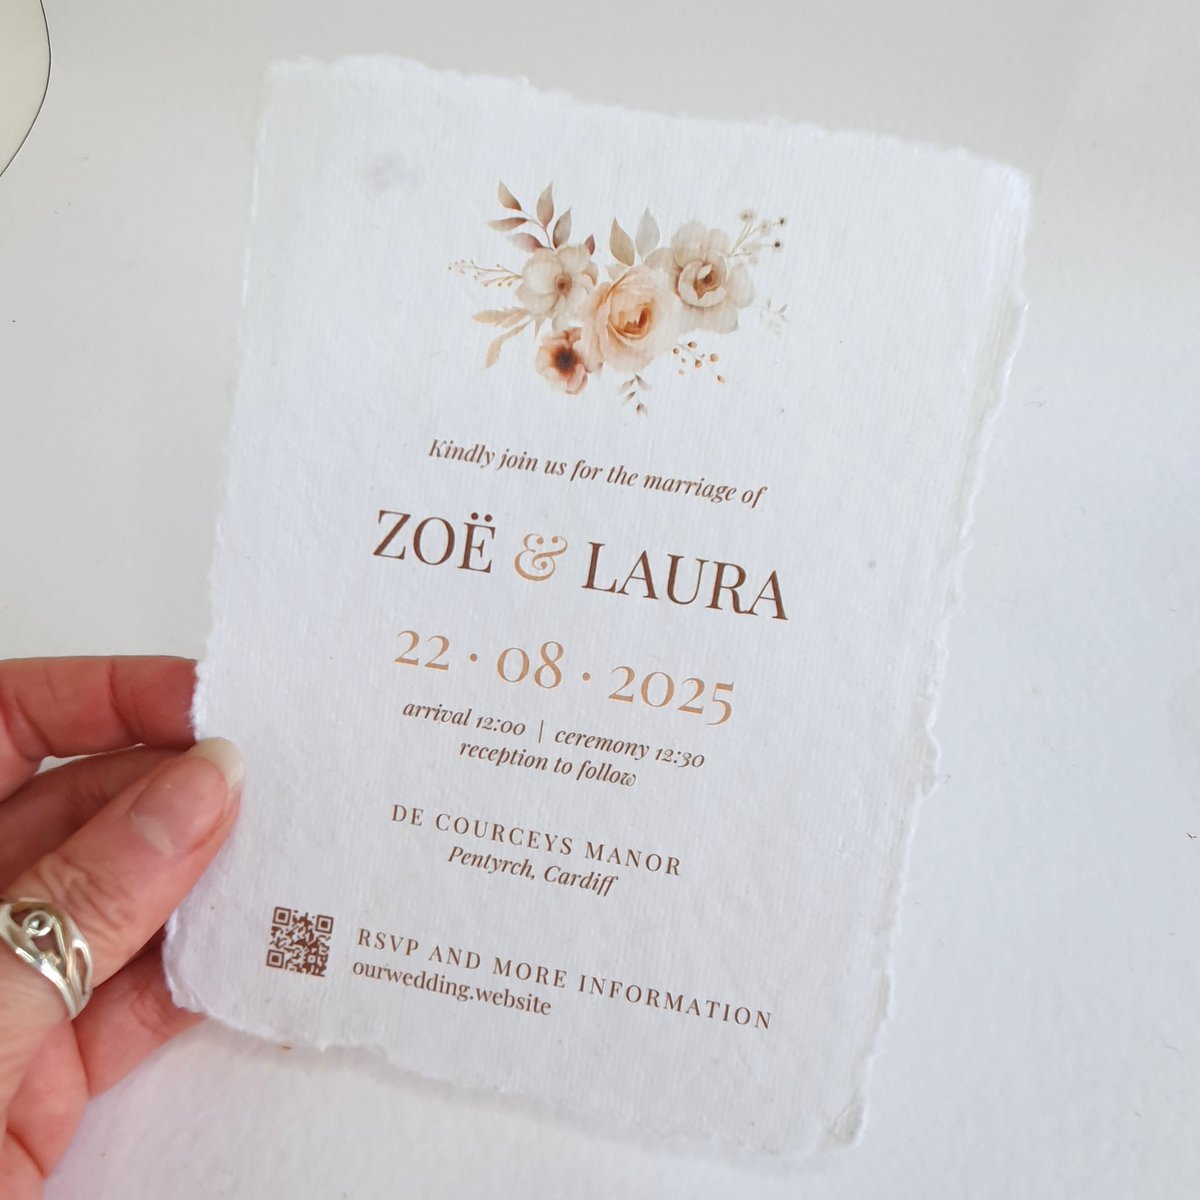 a wedding invitation printed on handmade paper with a torn deckle edge. There is a champagne floral bouquet design at the top above the text